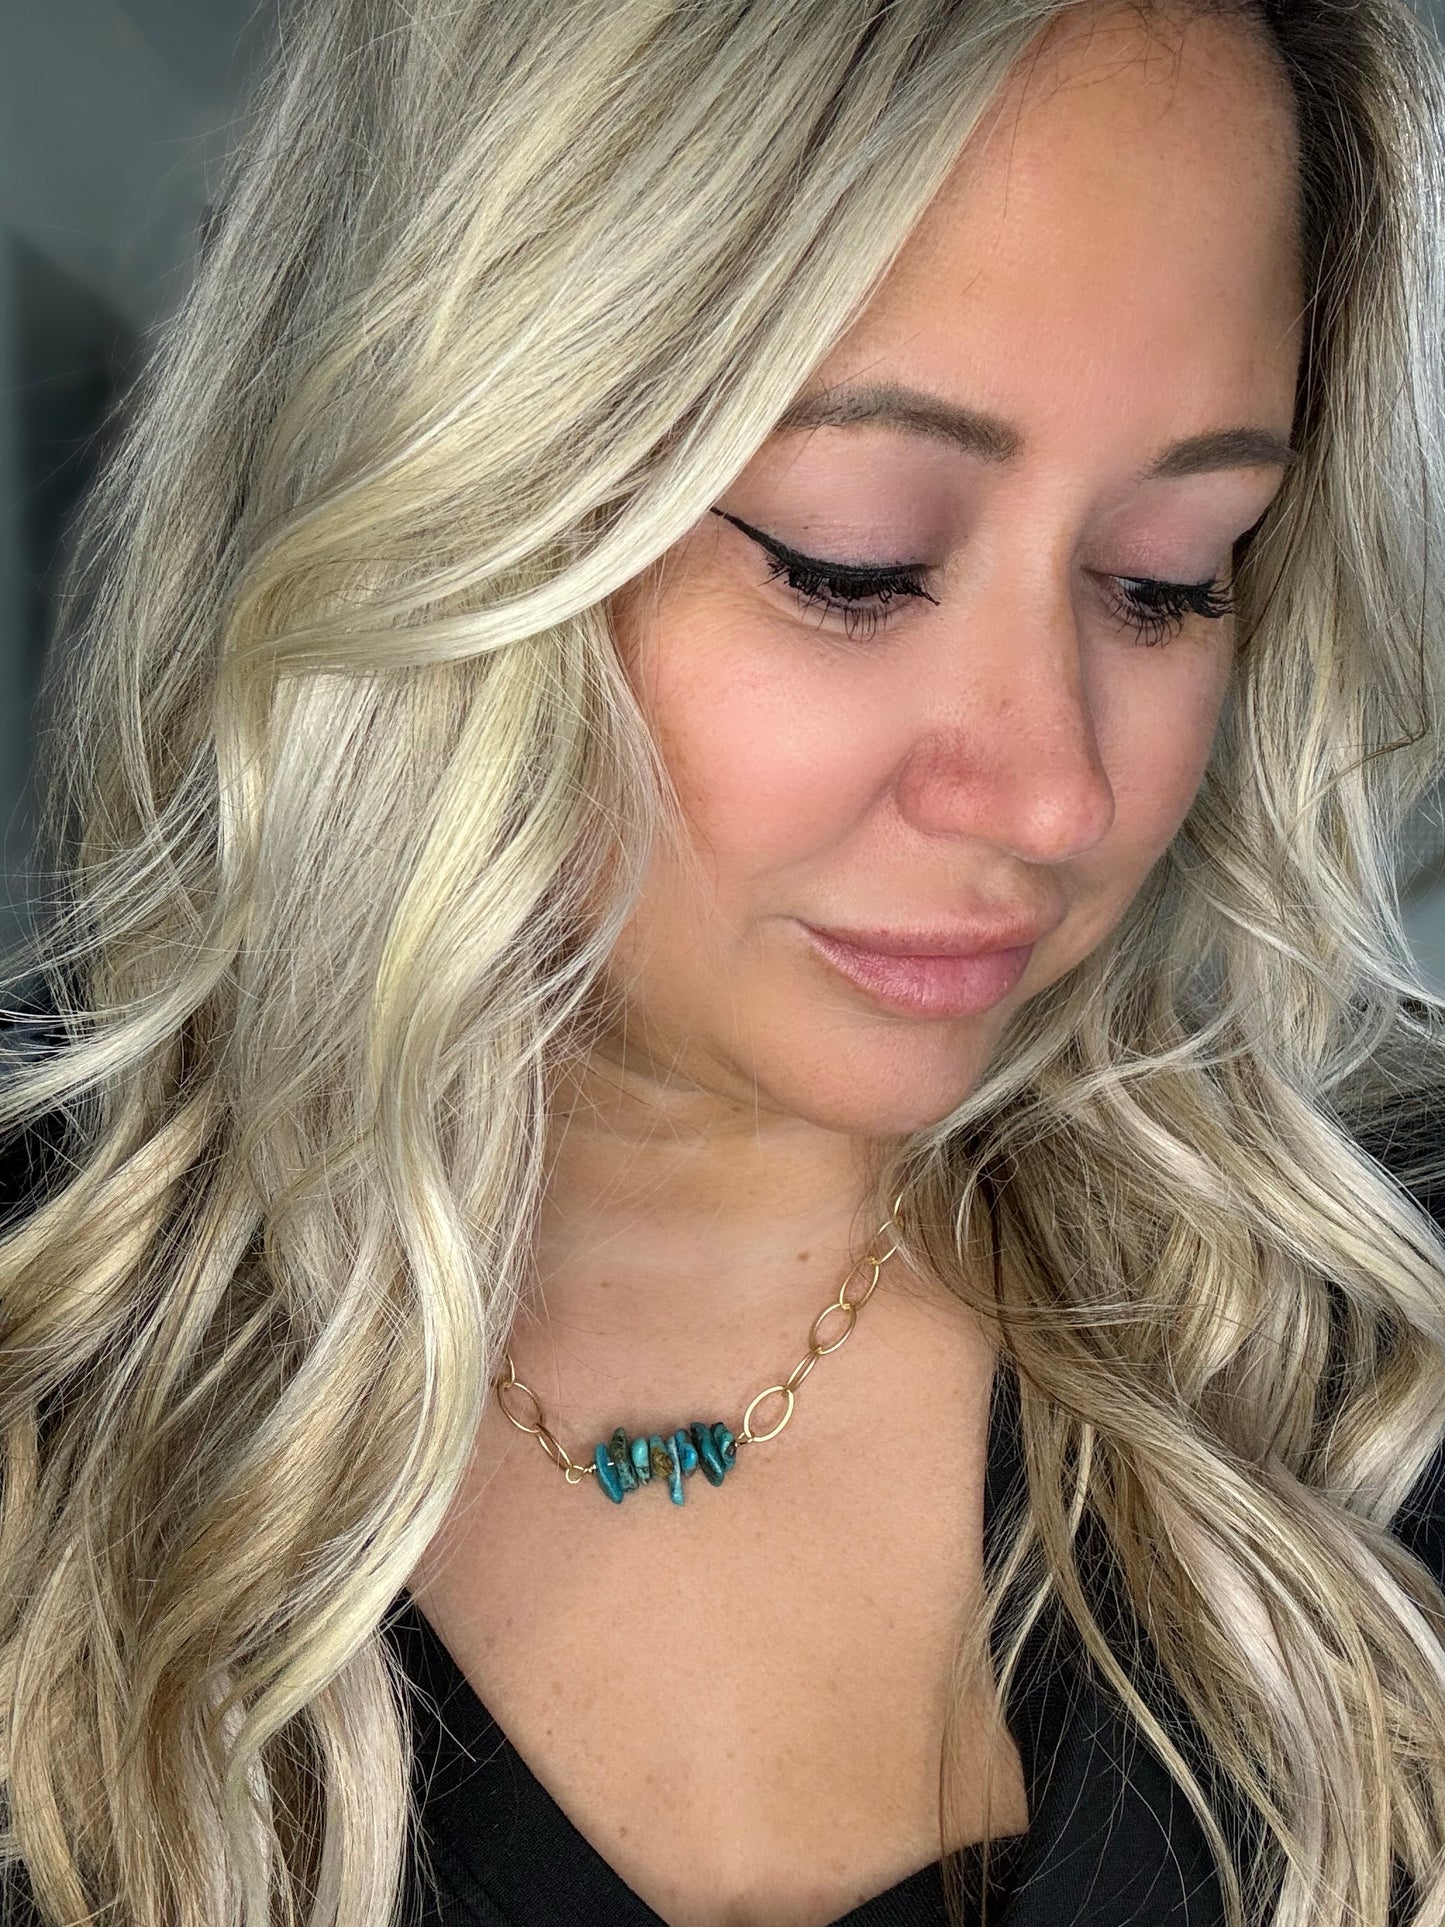 Turquoise + Matte Gold Necklace